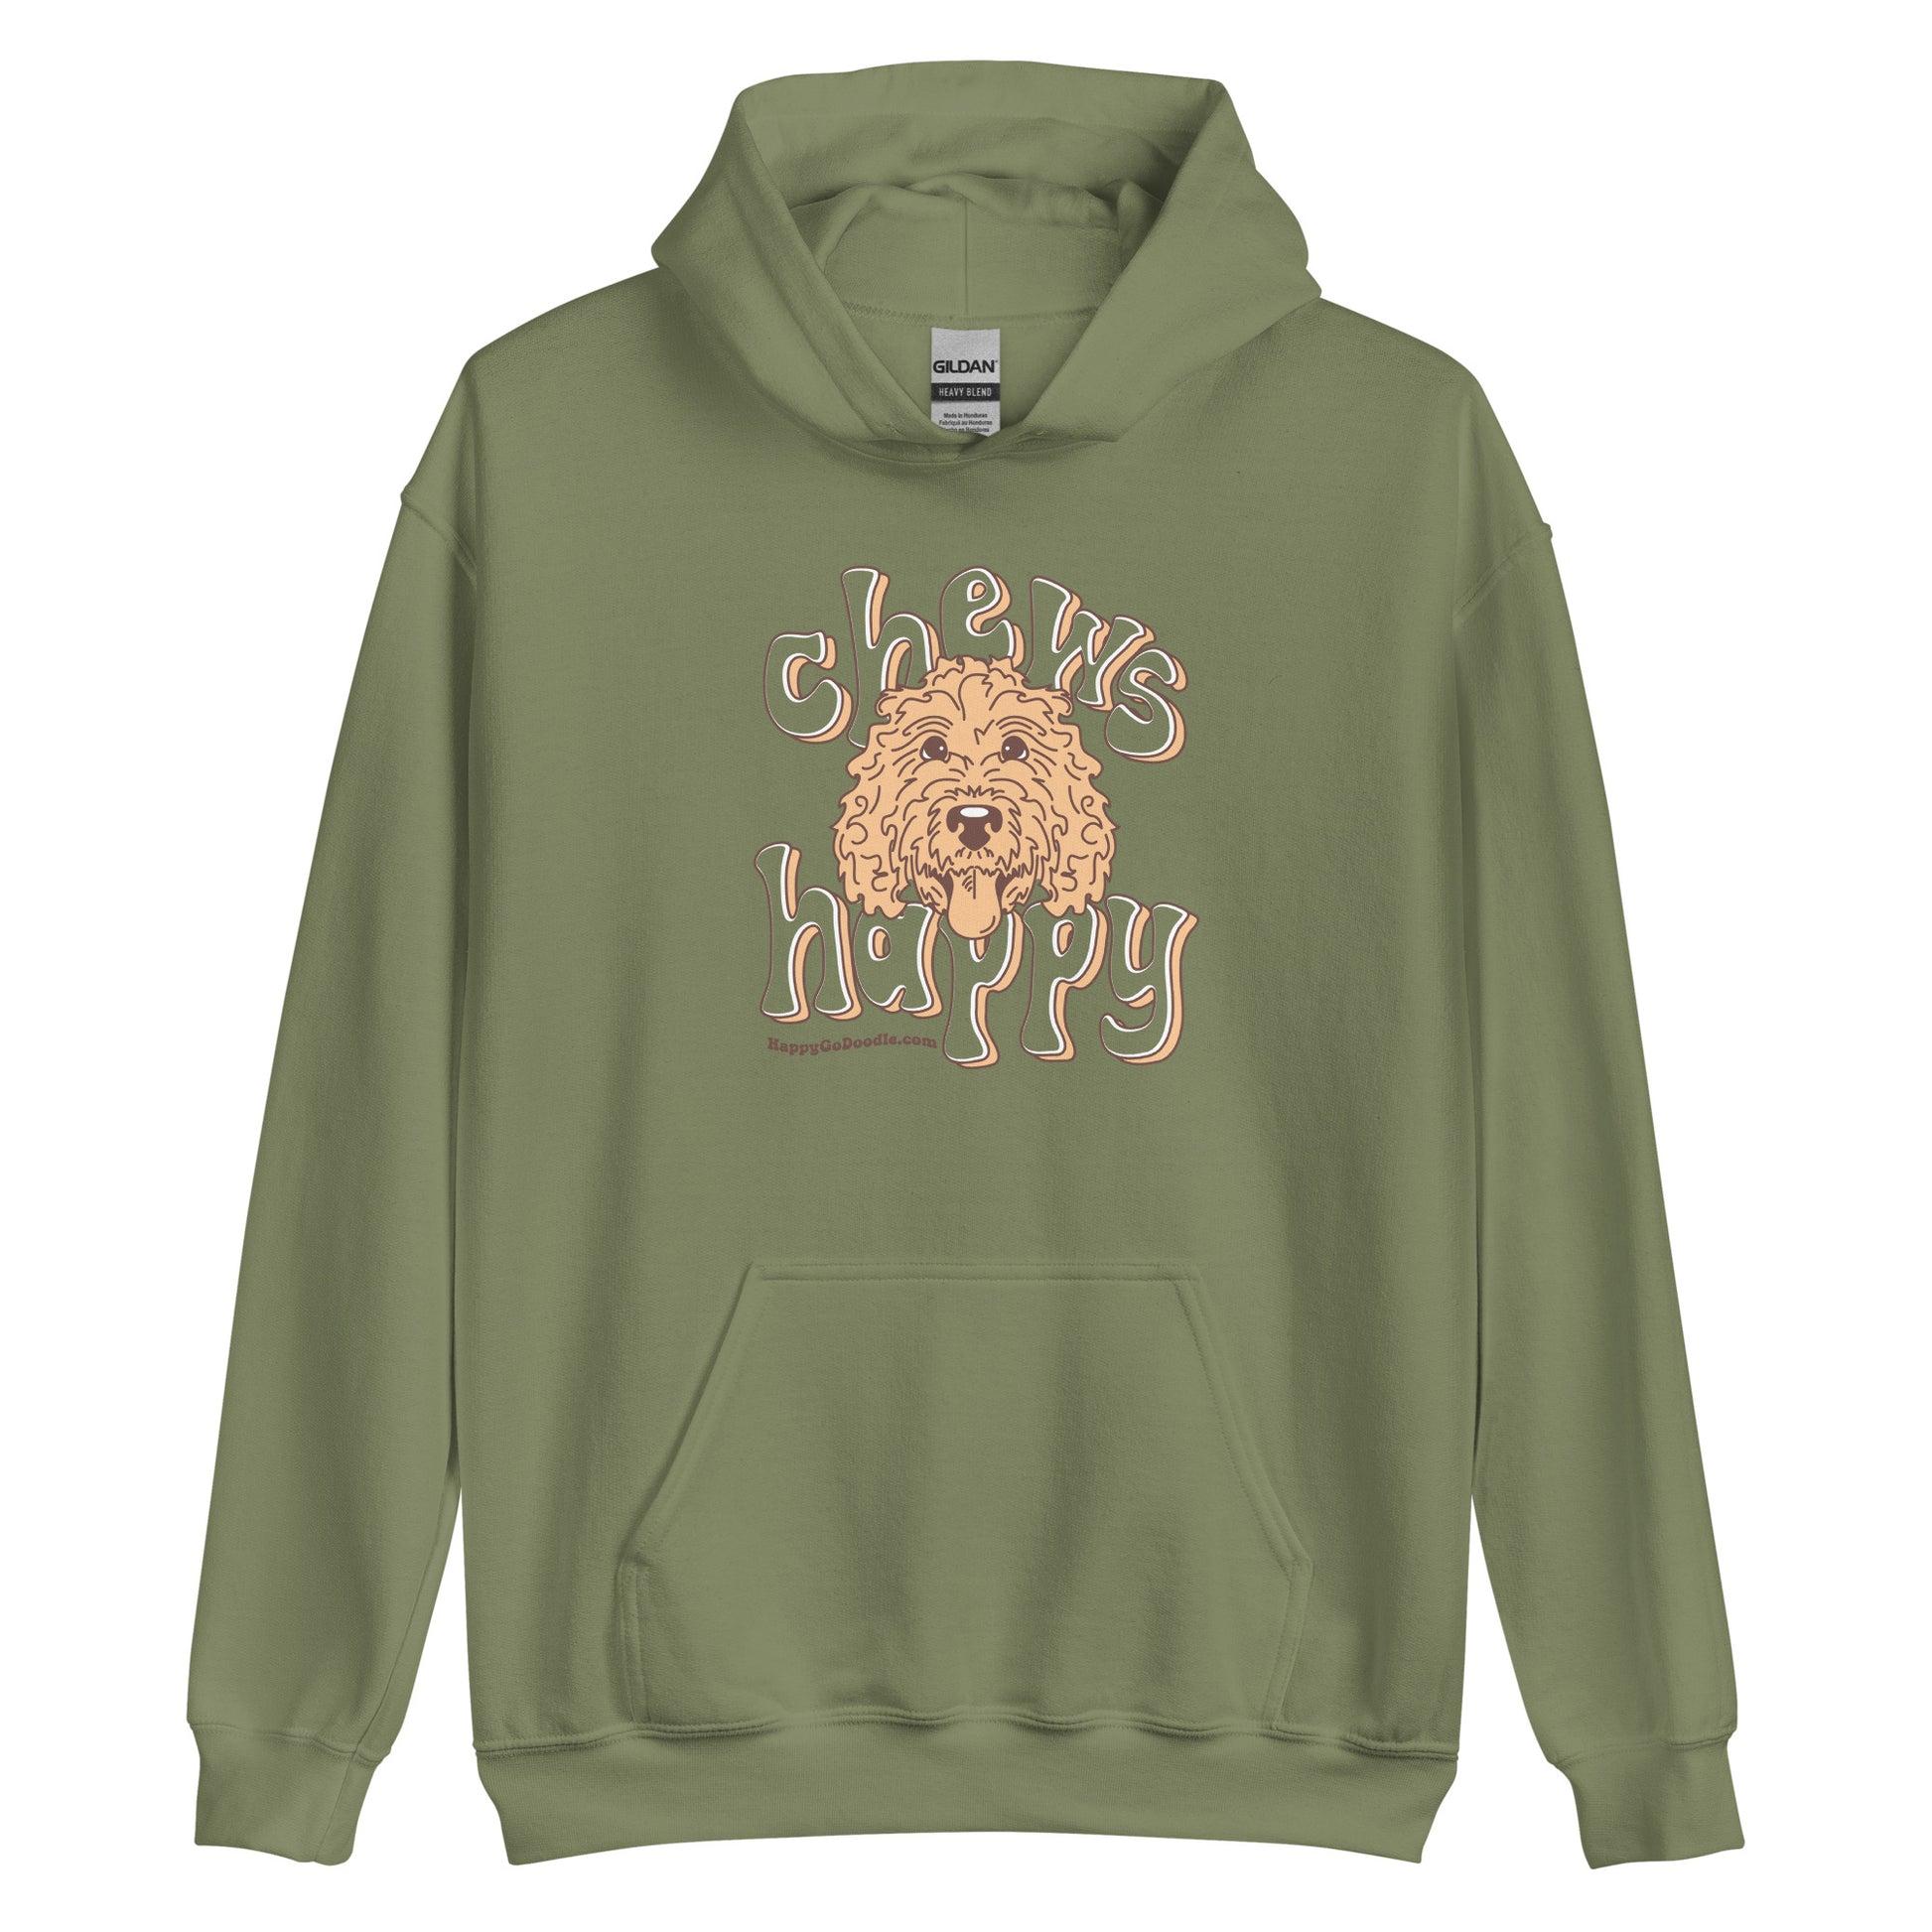 Goldendoodle hoodie with Goldendoodle face and words "Chews Happy" in military green color